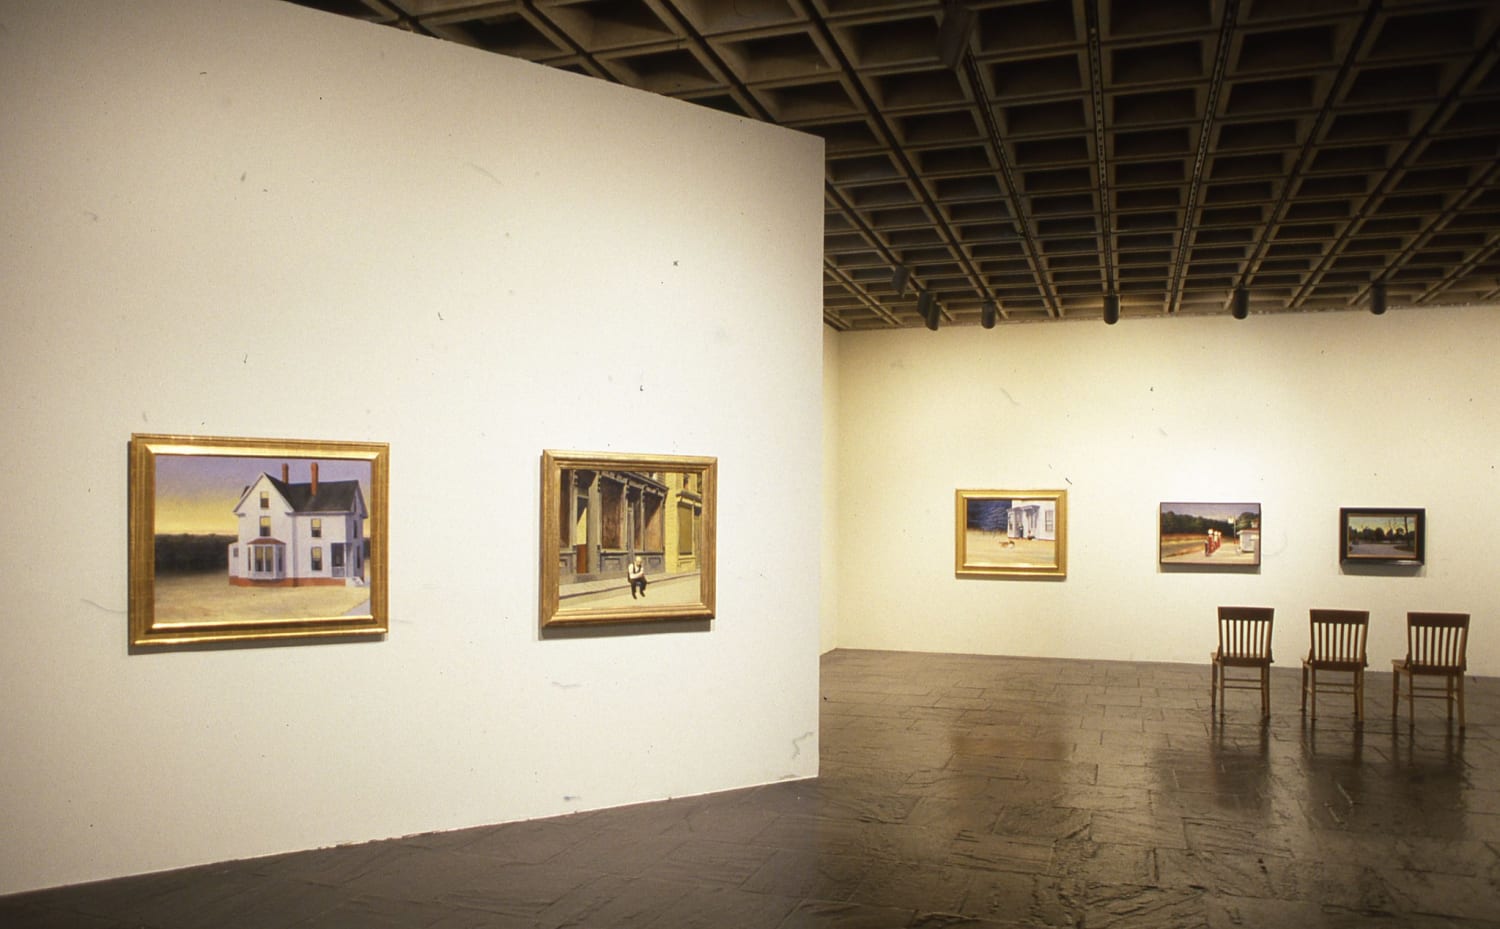 tbt to the Whitney's 1995 exhibition spotlighting EdwardHopper. Edward Hopper and the American Imagination positioned Hopper as more than one of the 20th century's greatest artists; it also explored his influence on postmodern art, film, and literature.